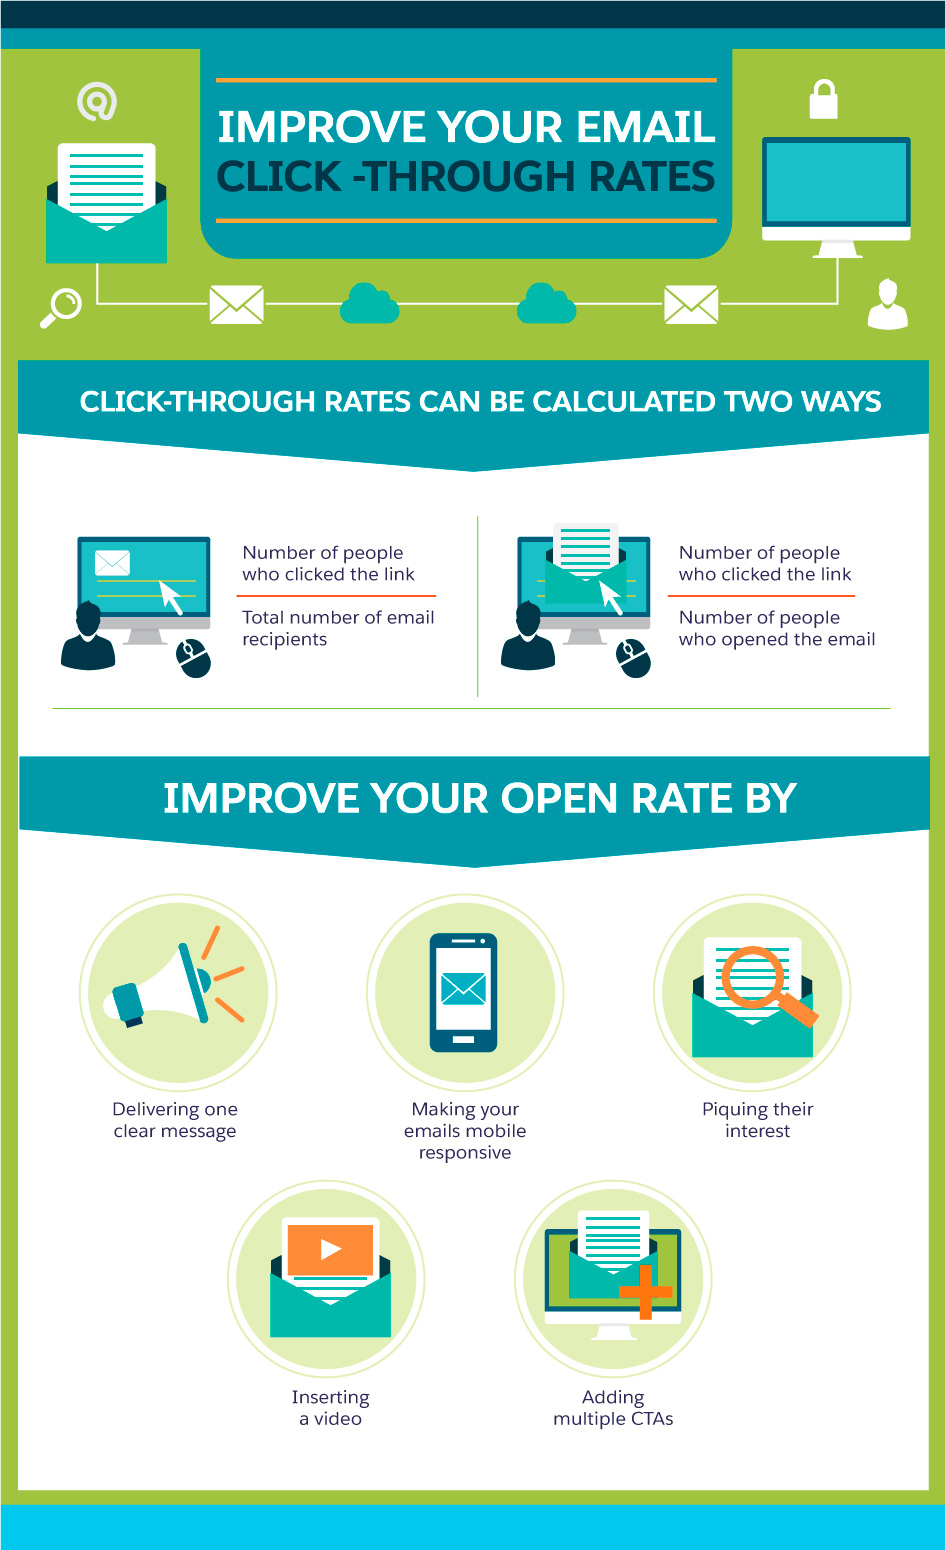 Best Practices for Improving Open Rates